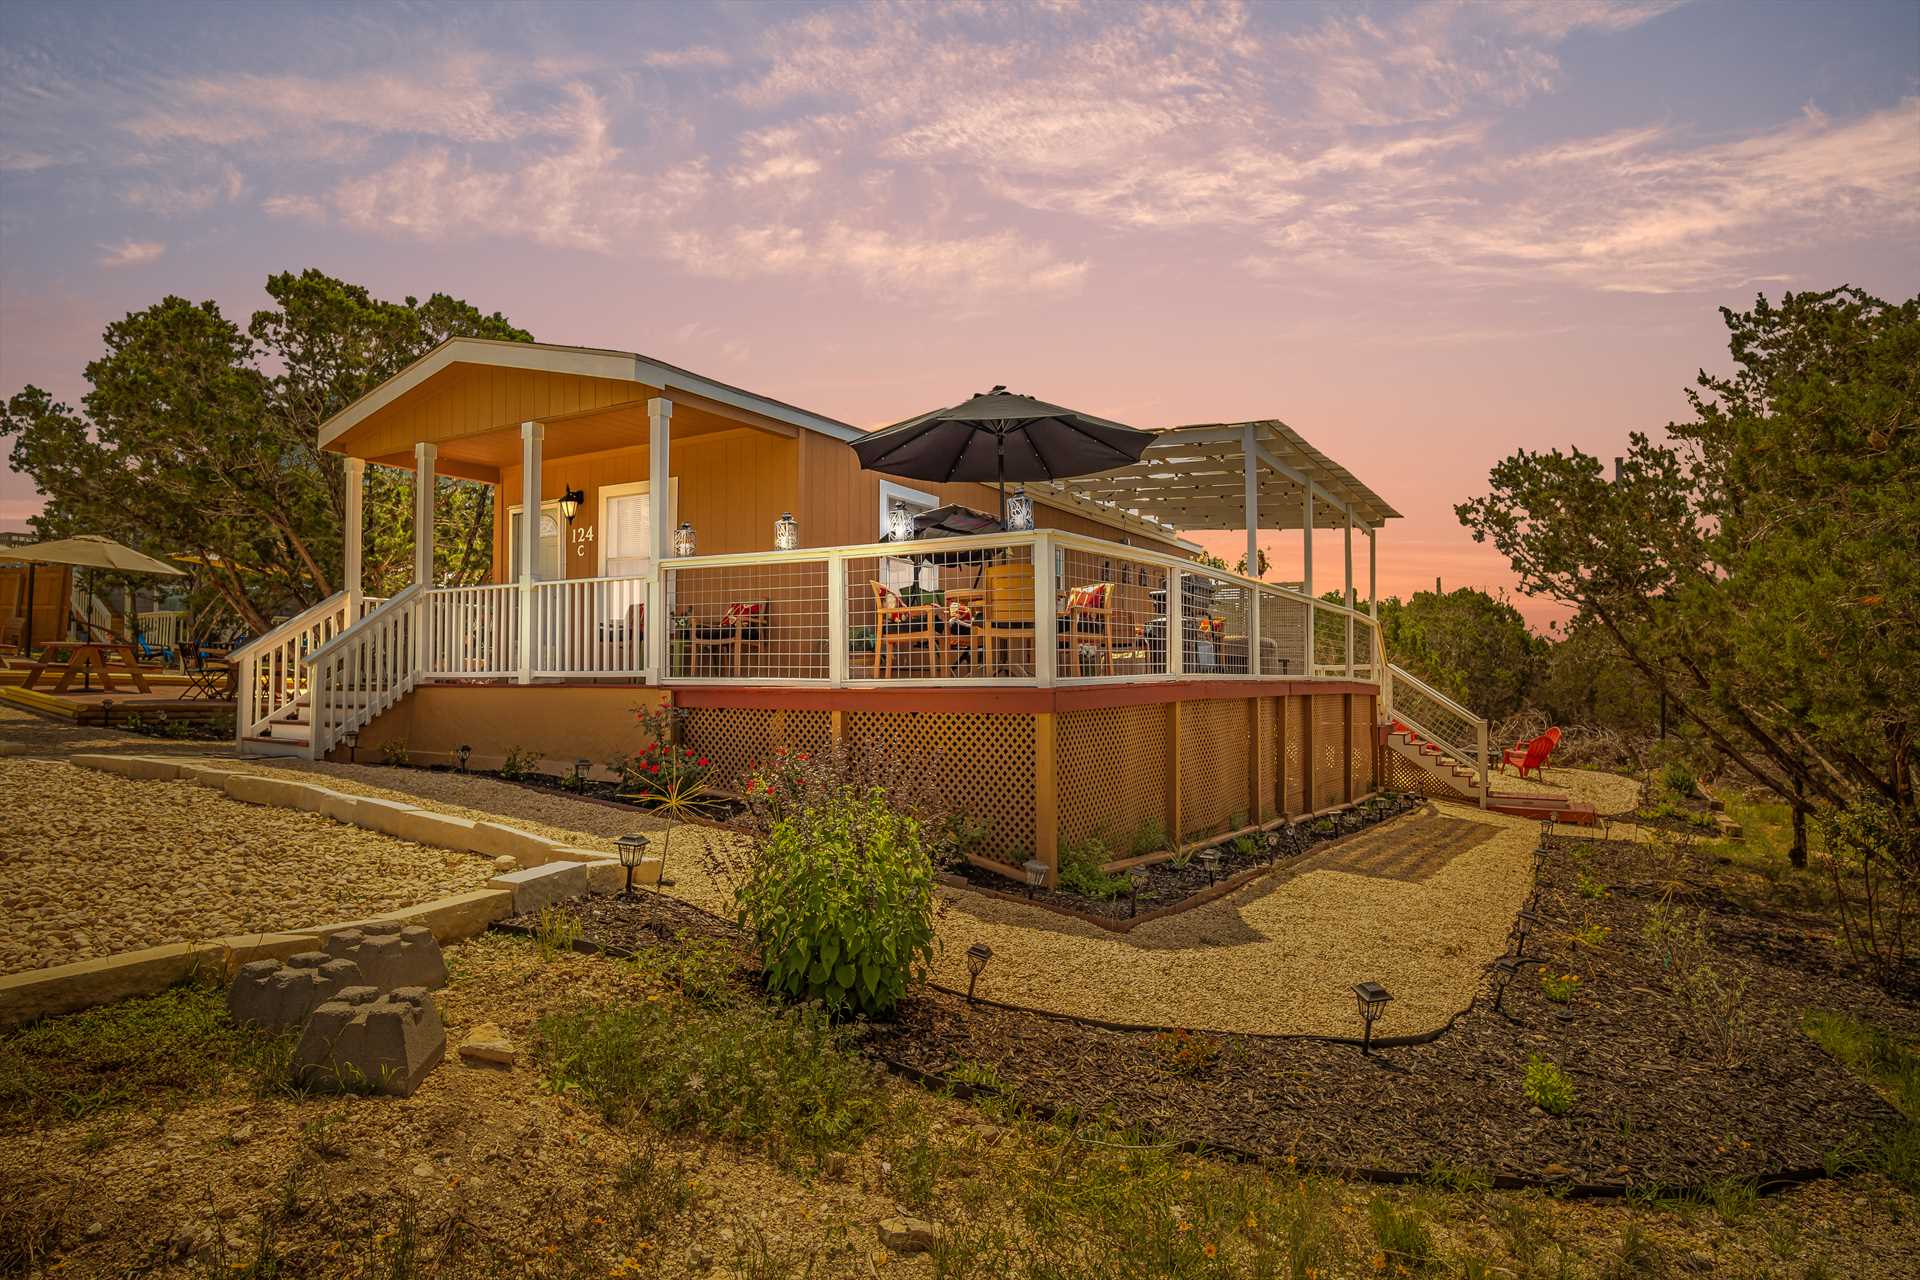                                                 Hill Country Memories is built and landscaped to fit in perfectly with its picturesque surroundings.